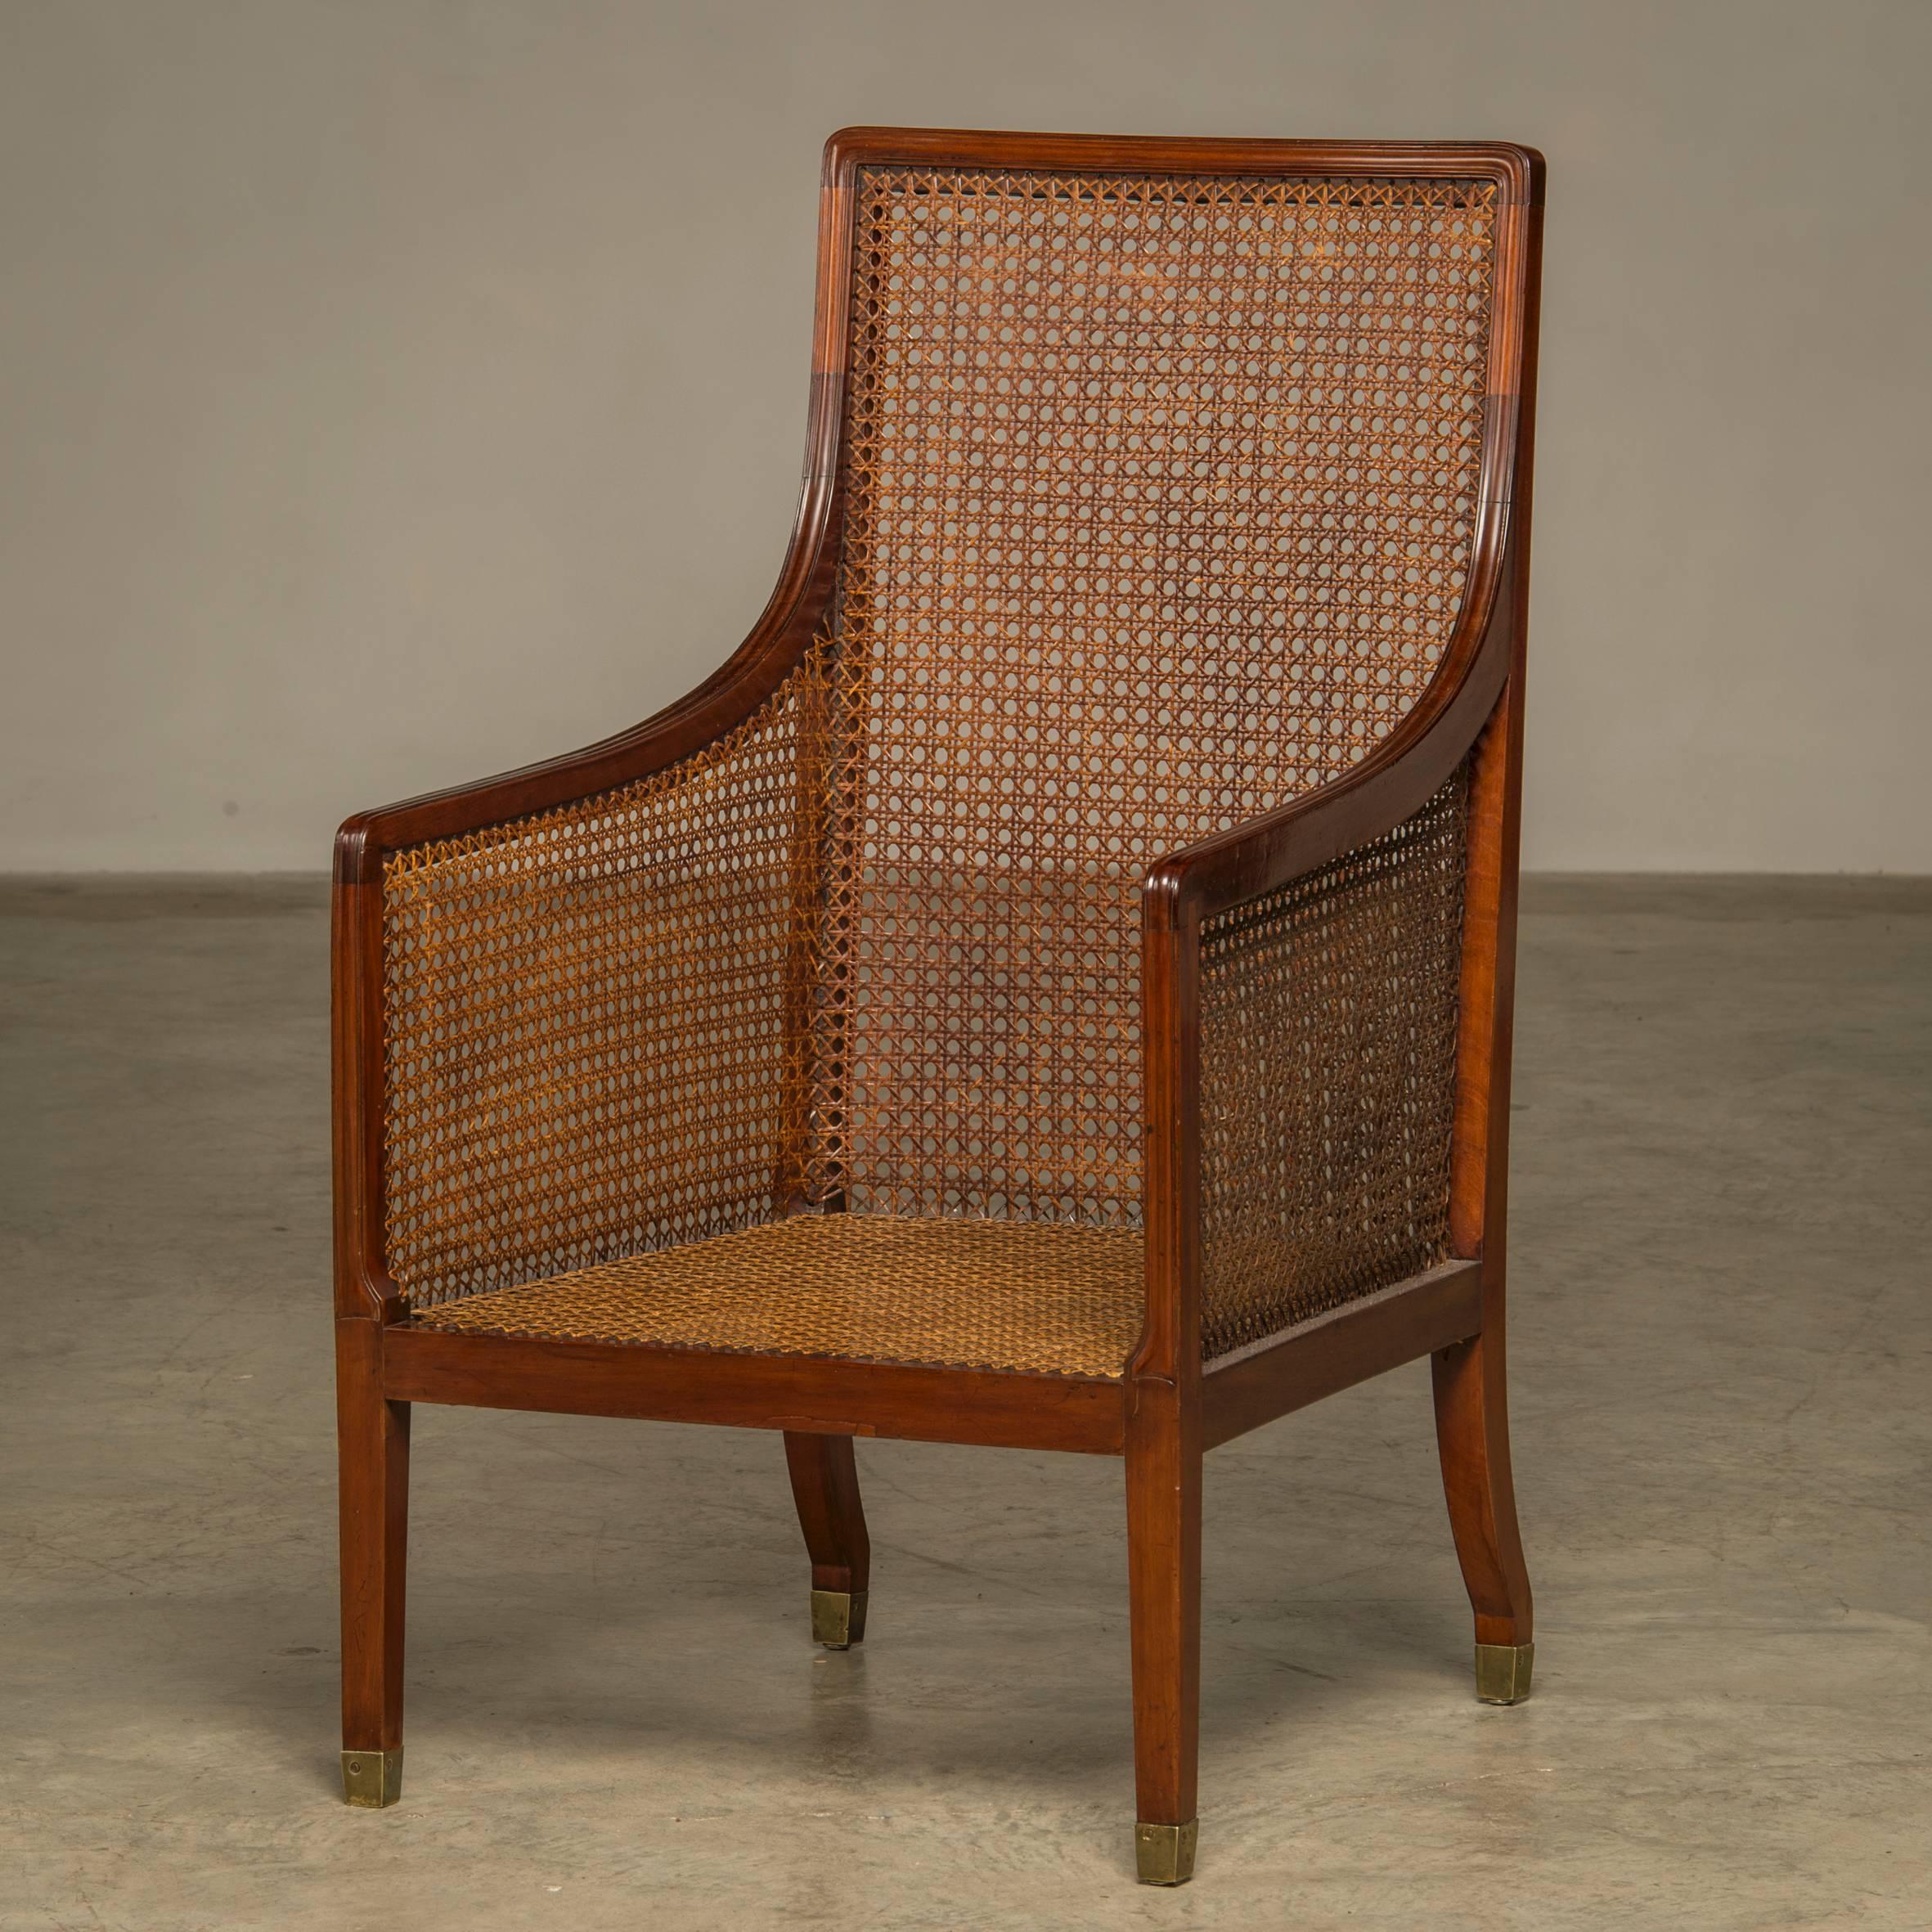 Elegant regency armchair in mahogany with cane in the sides, back and seat. Legs with brass shoes, 
England, circa 1820. 
Loose cushions reupholstered with velvet.